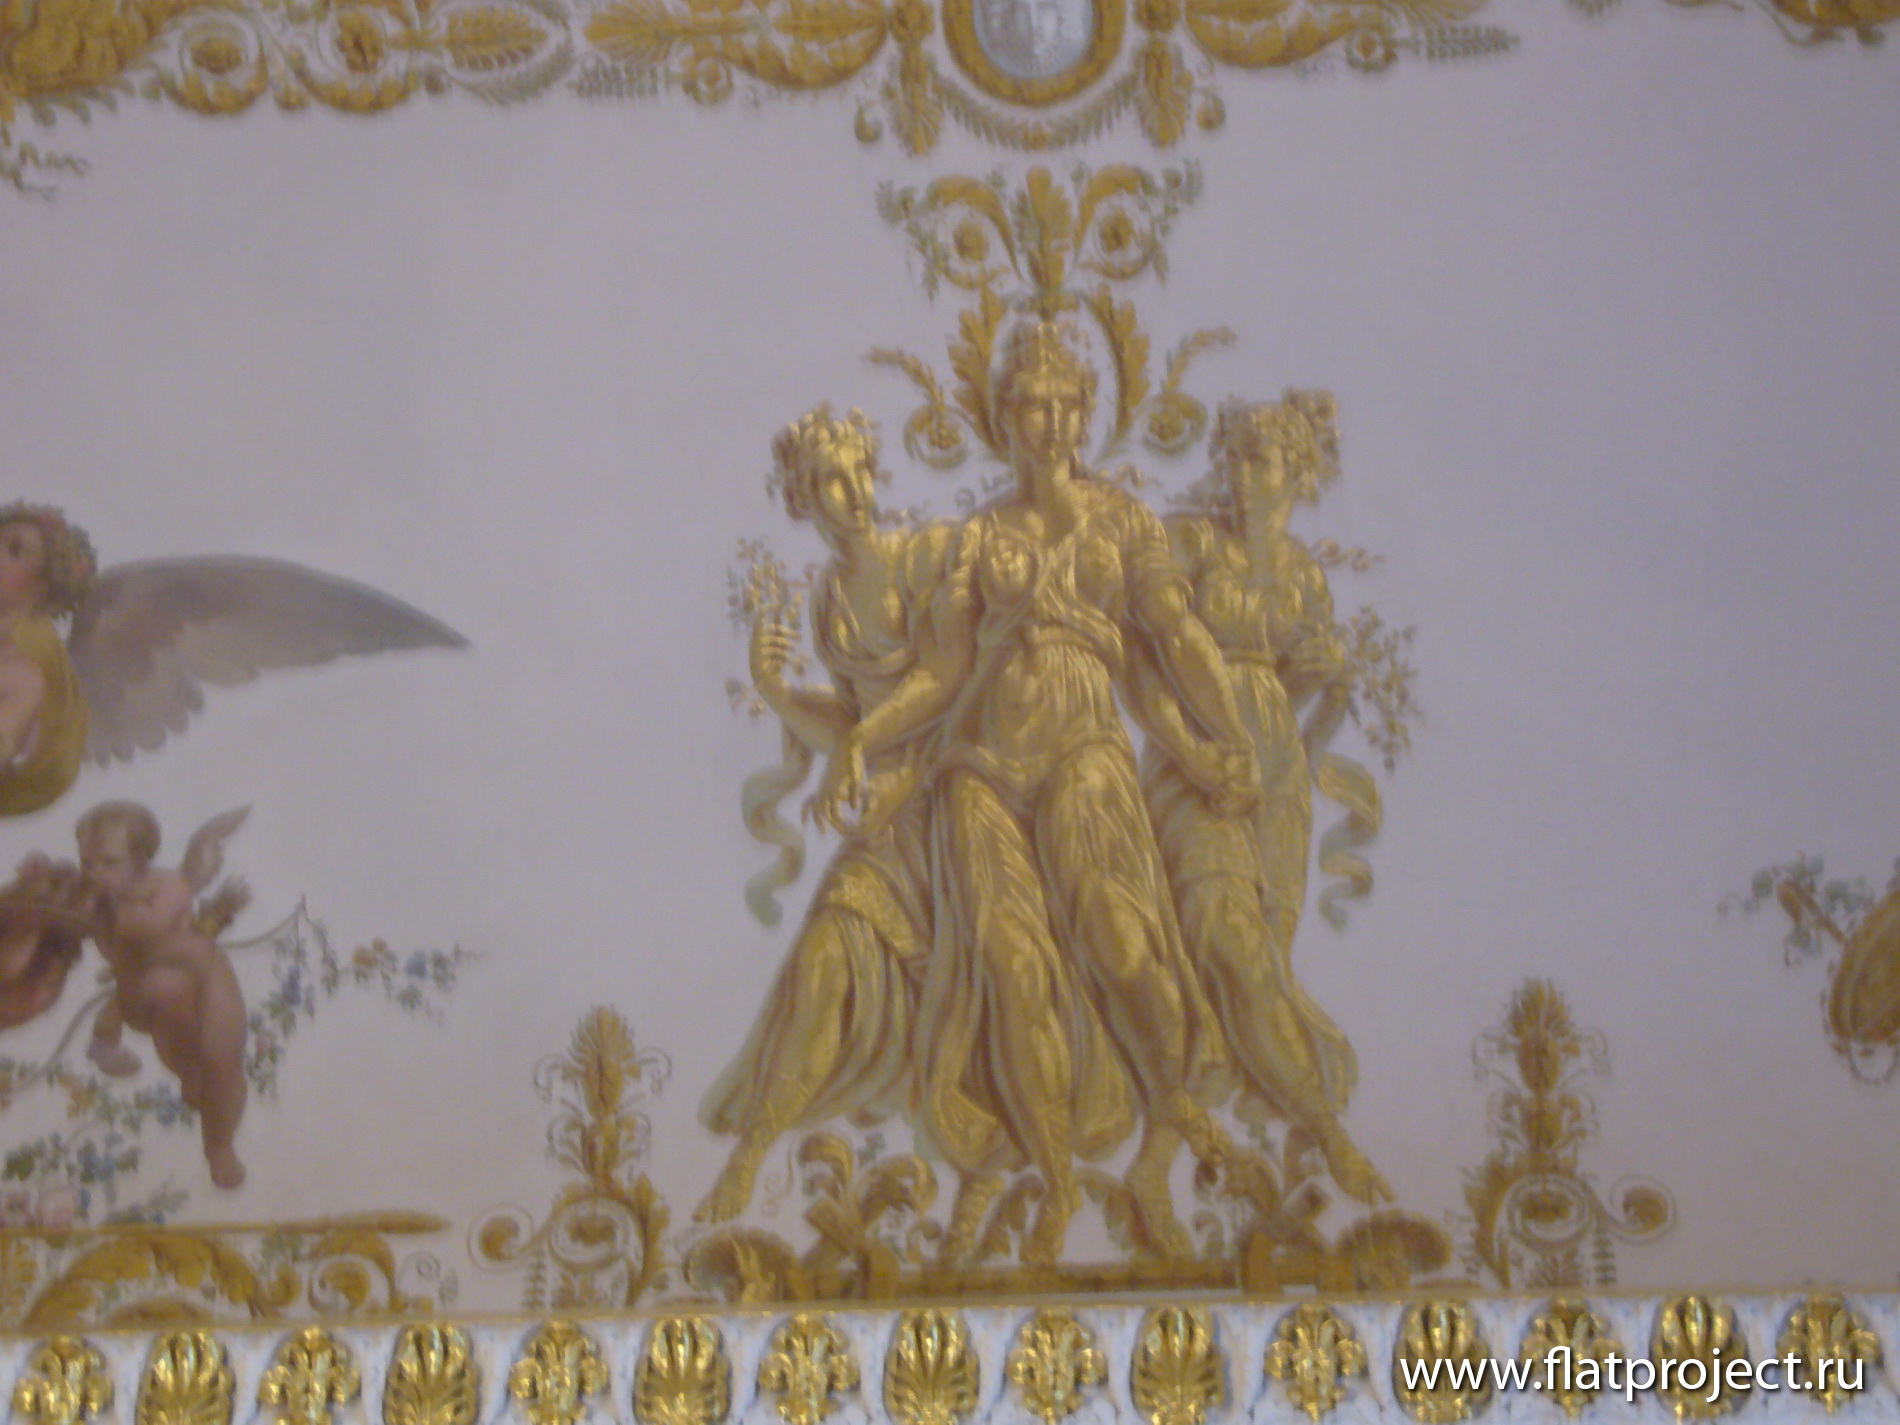 The State Russian museum interiors – photo 109